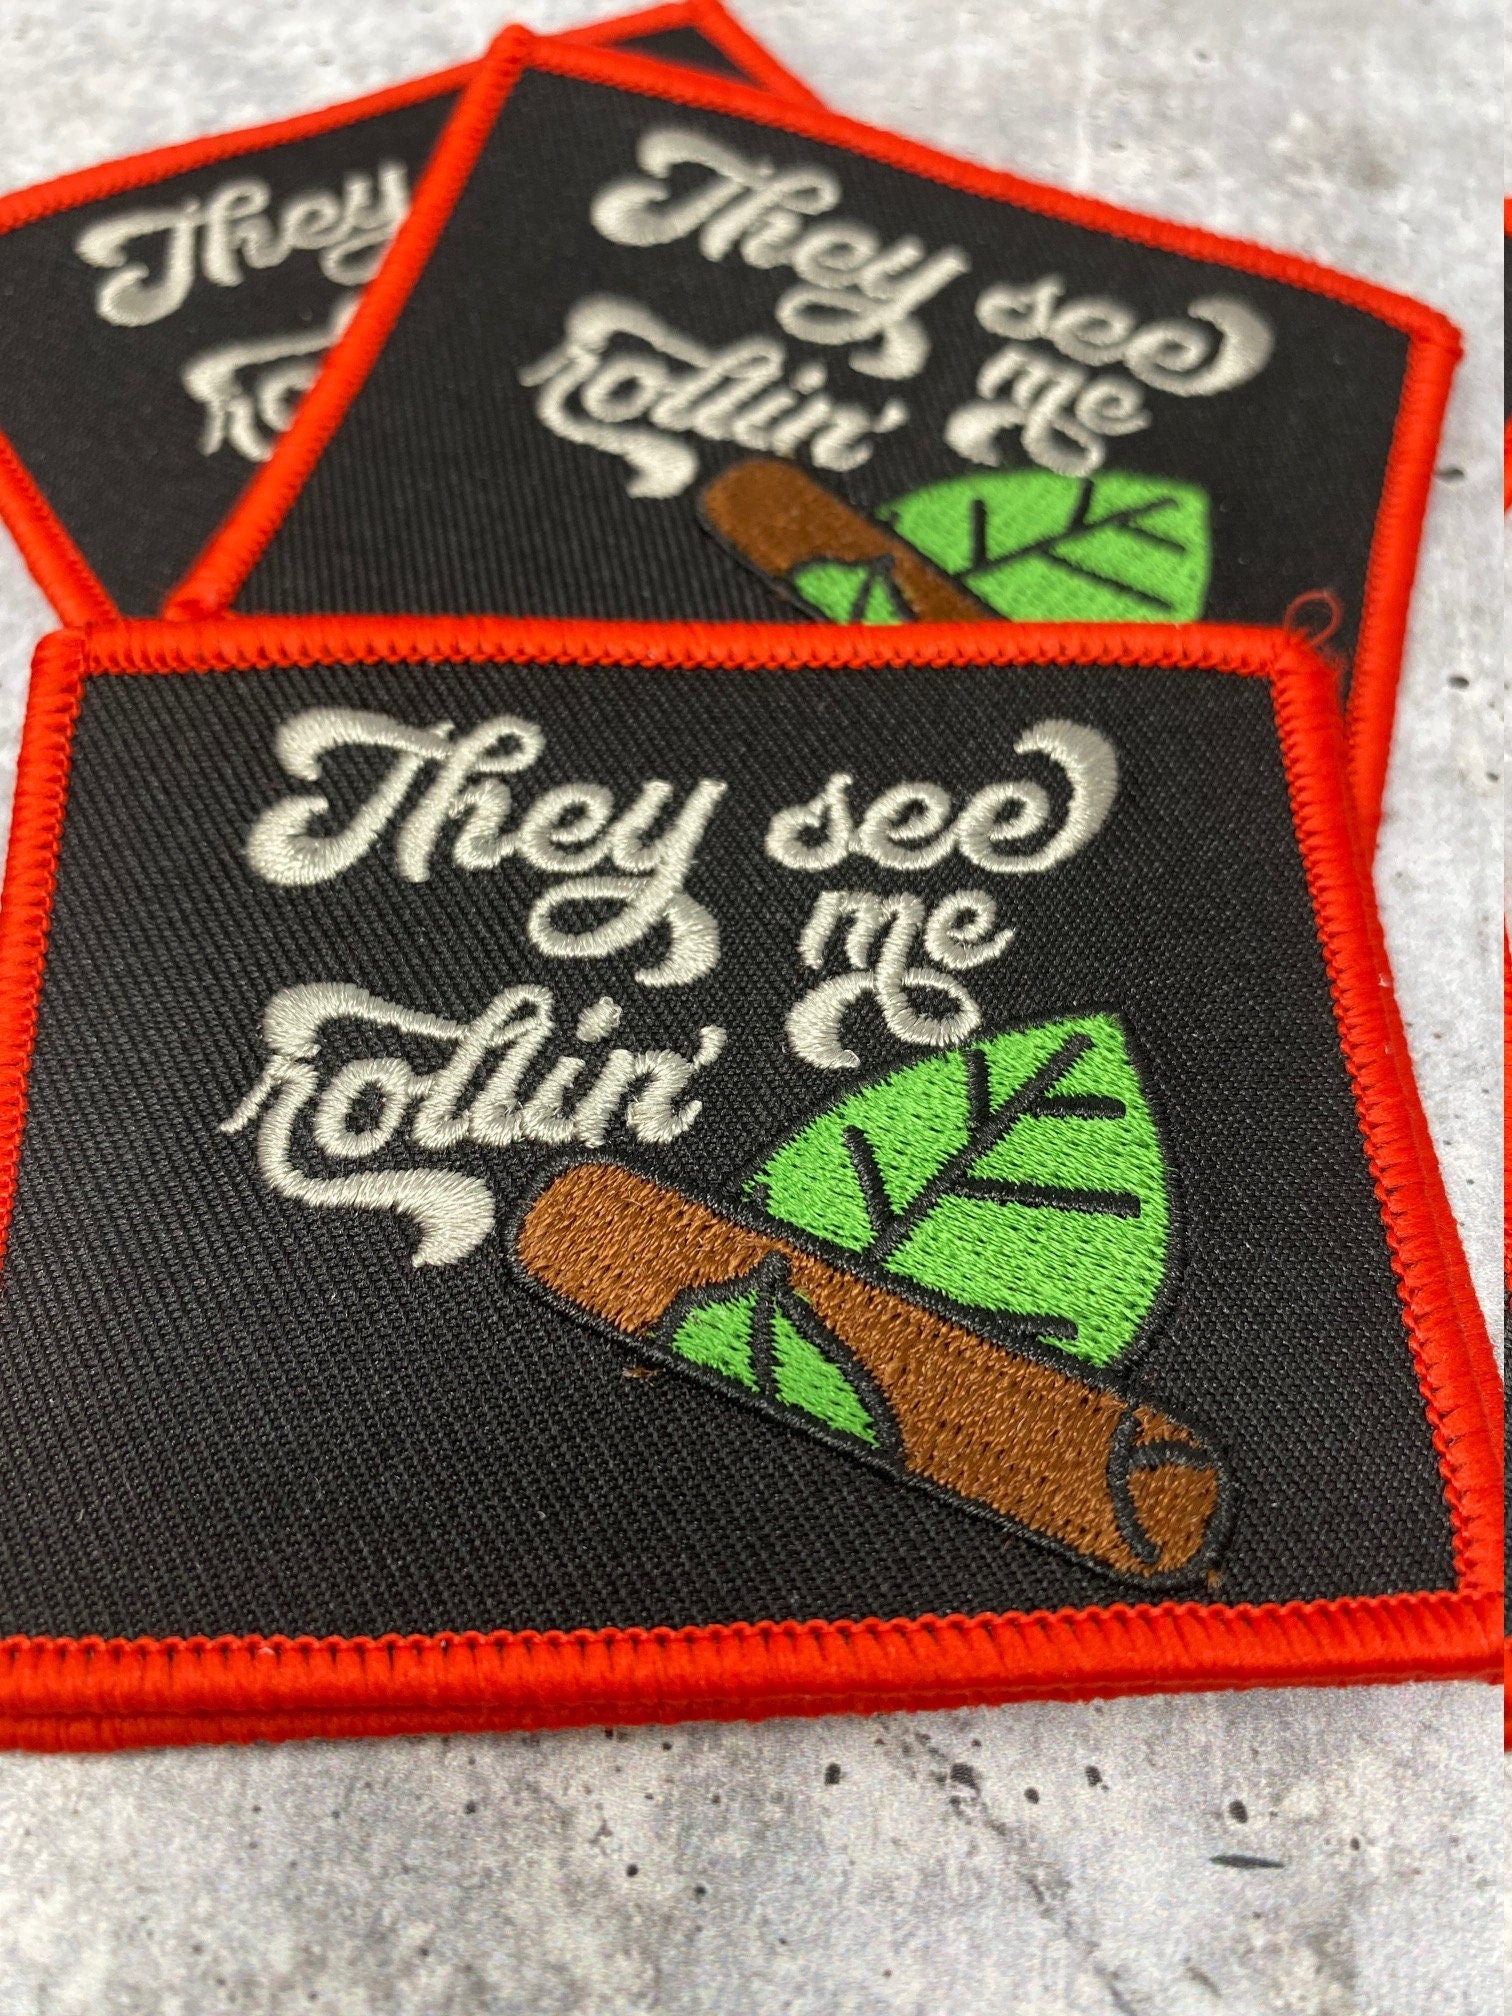 Cigar Lovers,Cigar Badge 1-pc, Smokers Gift, Cool Embroidered Patch,  Circular, Size 3', Iron-on, Patches for Men